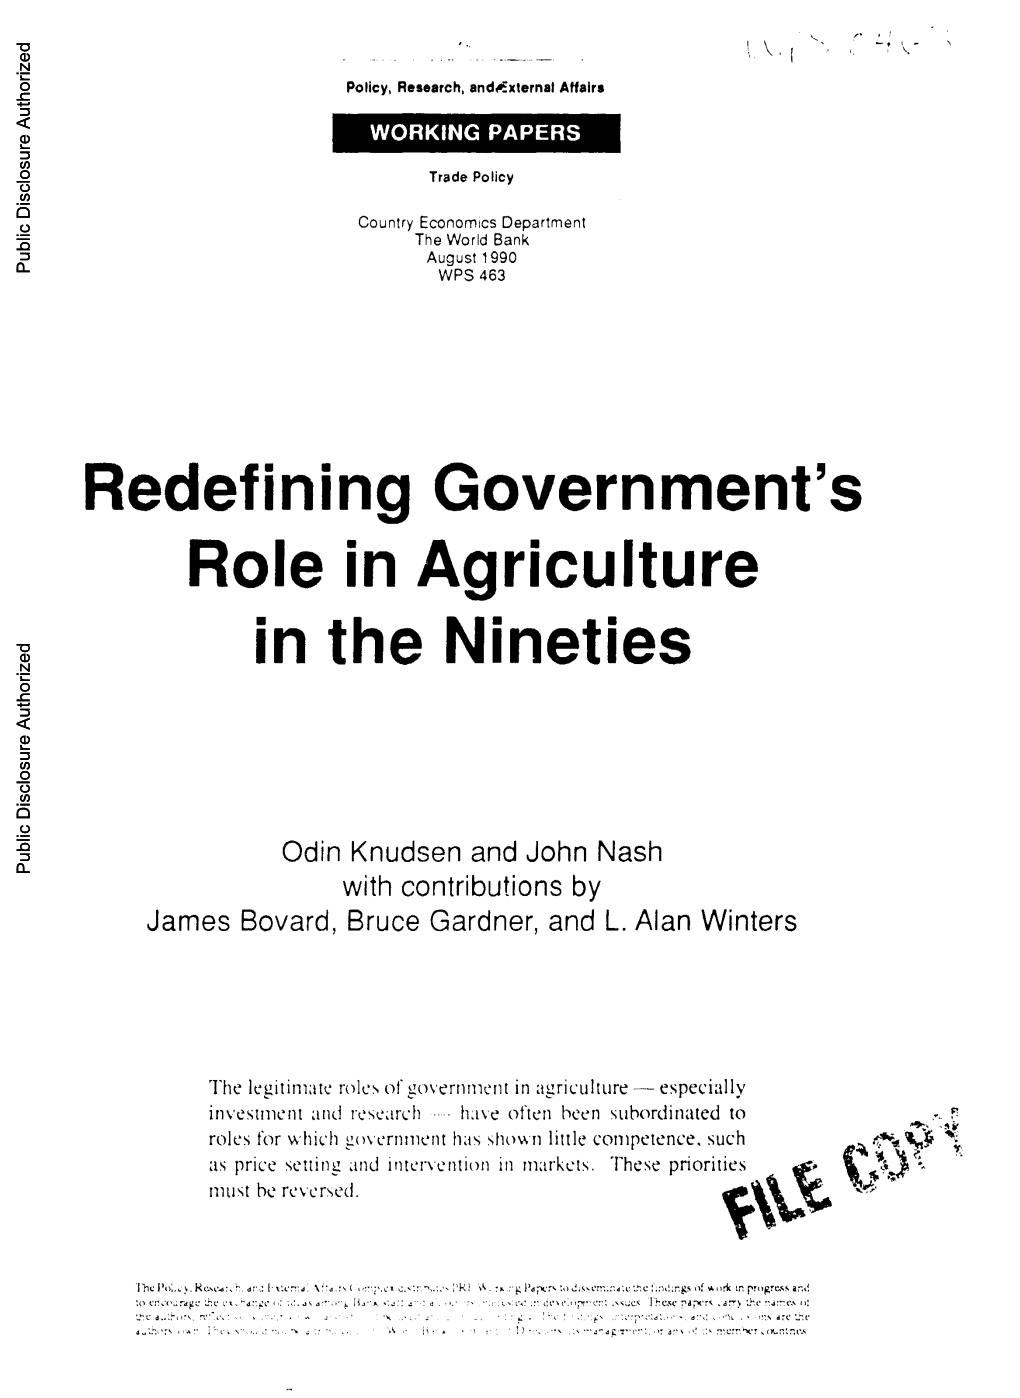 Redefining Government's Role in Agriculture in the Nineties